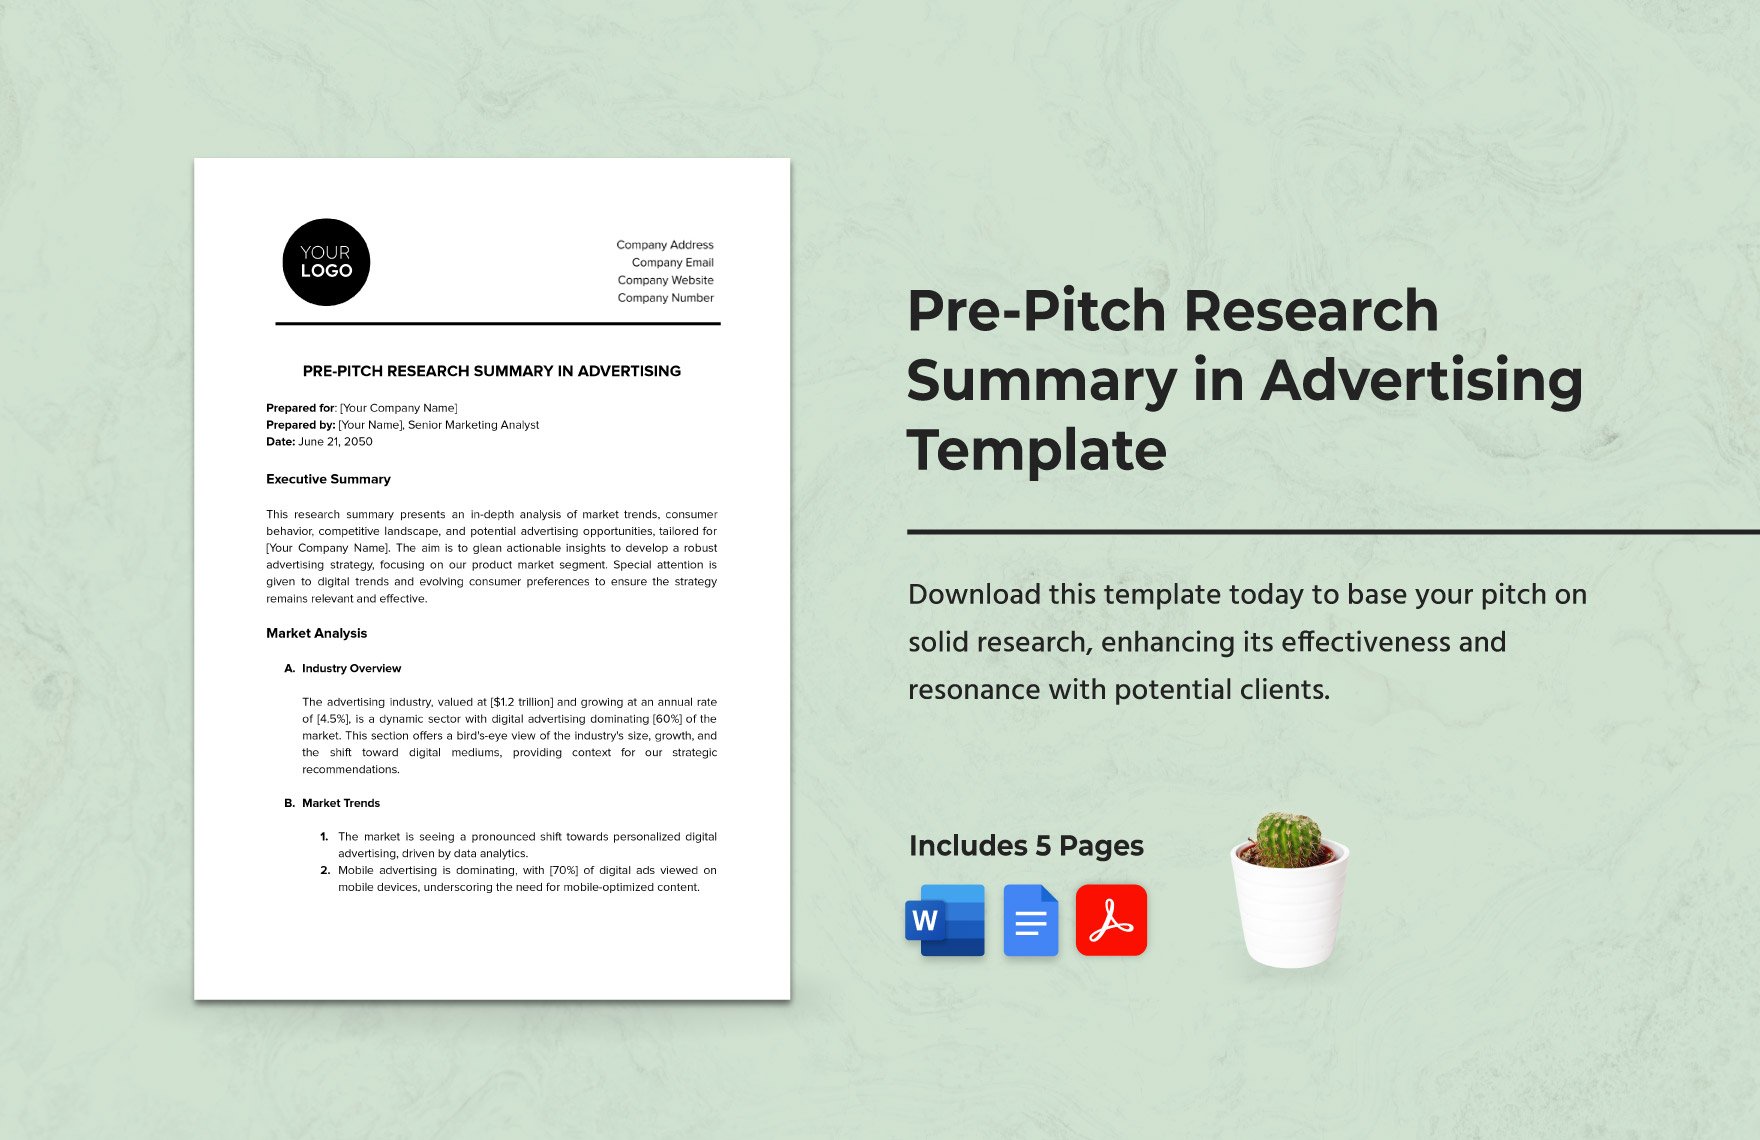 Pre-Pitch Research Summary in Advertising Template